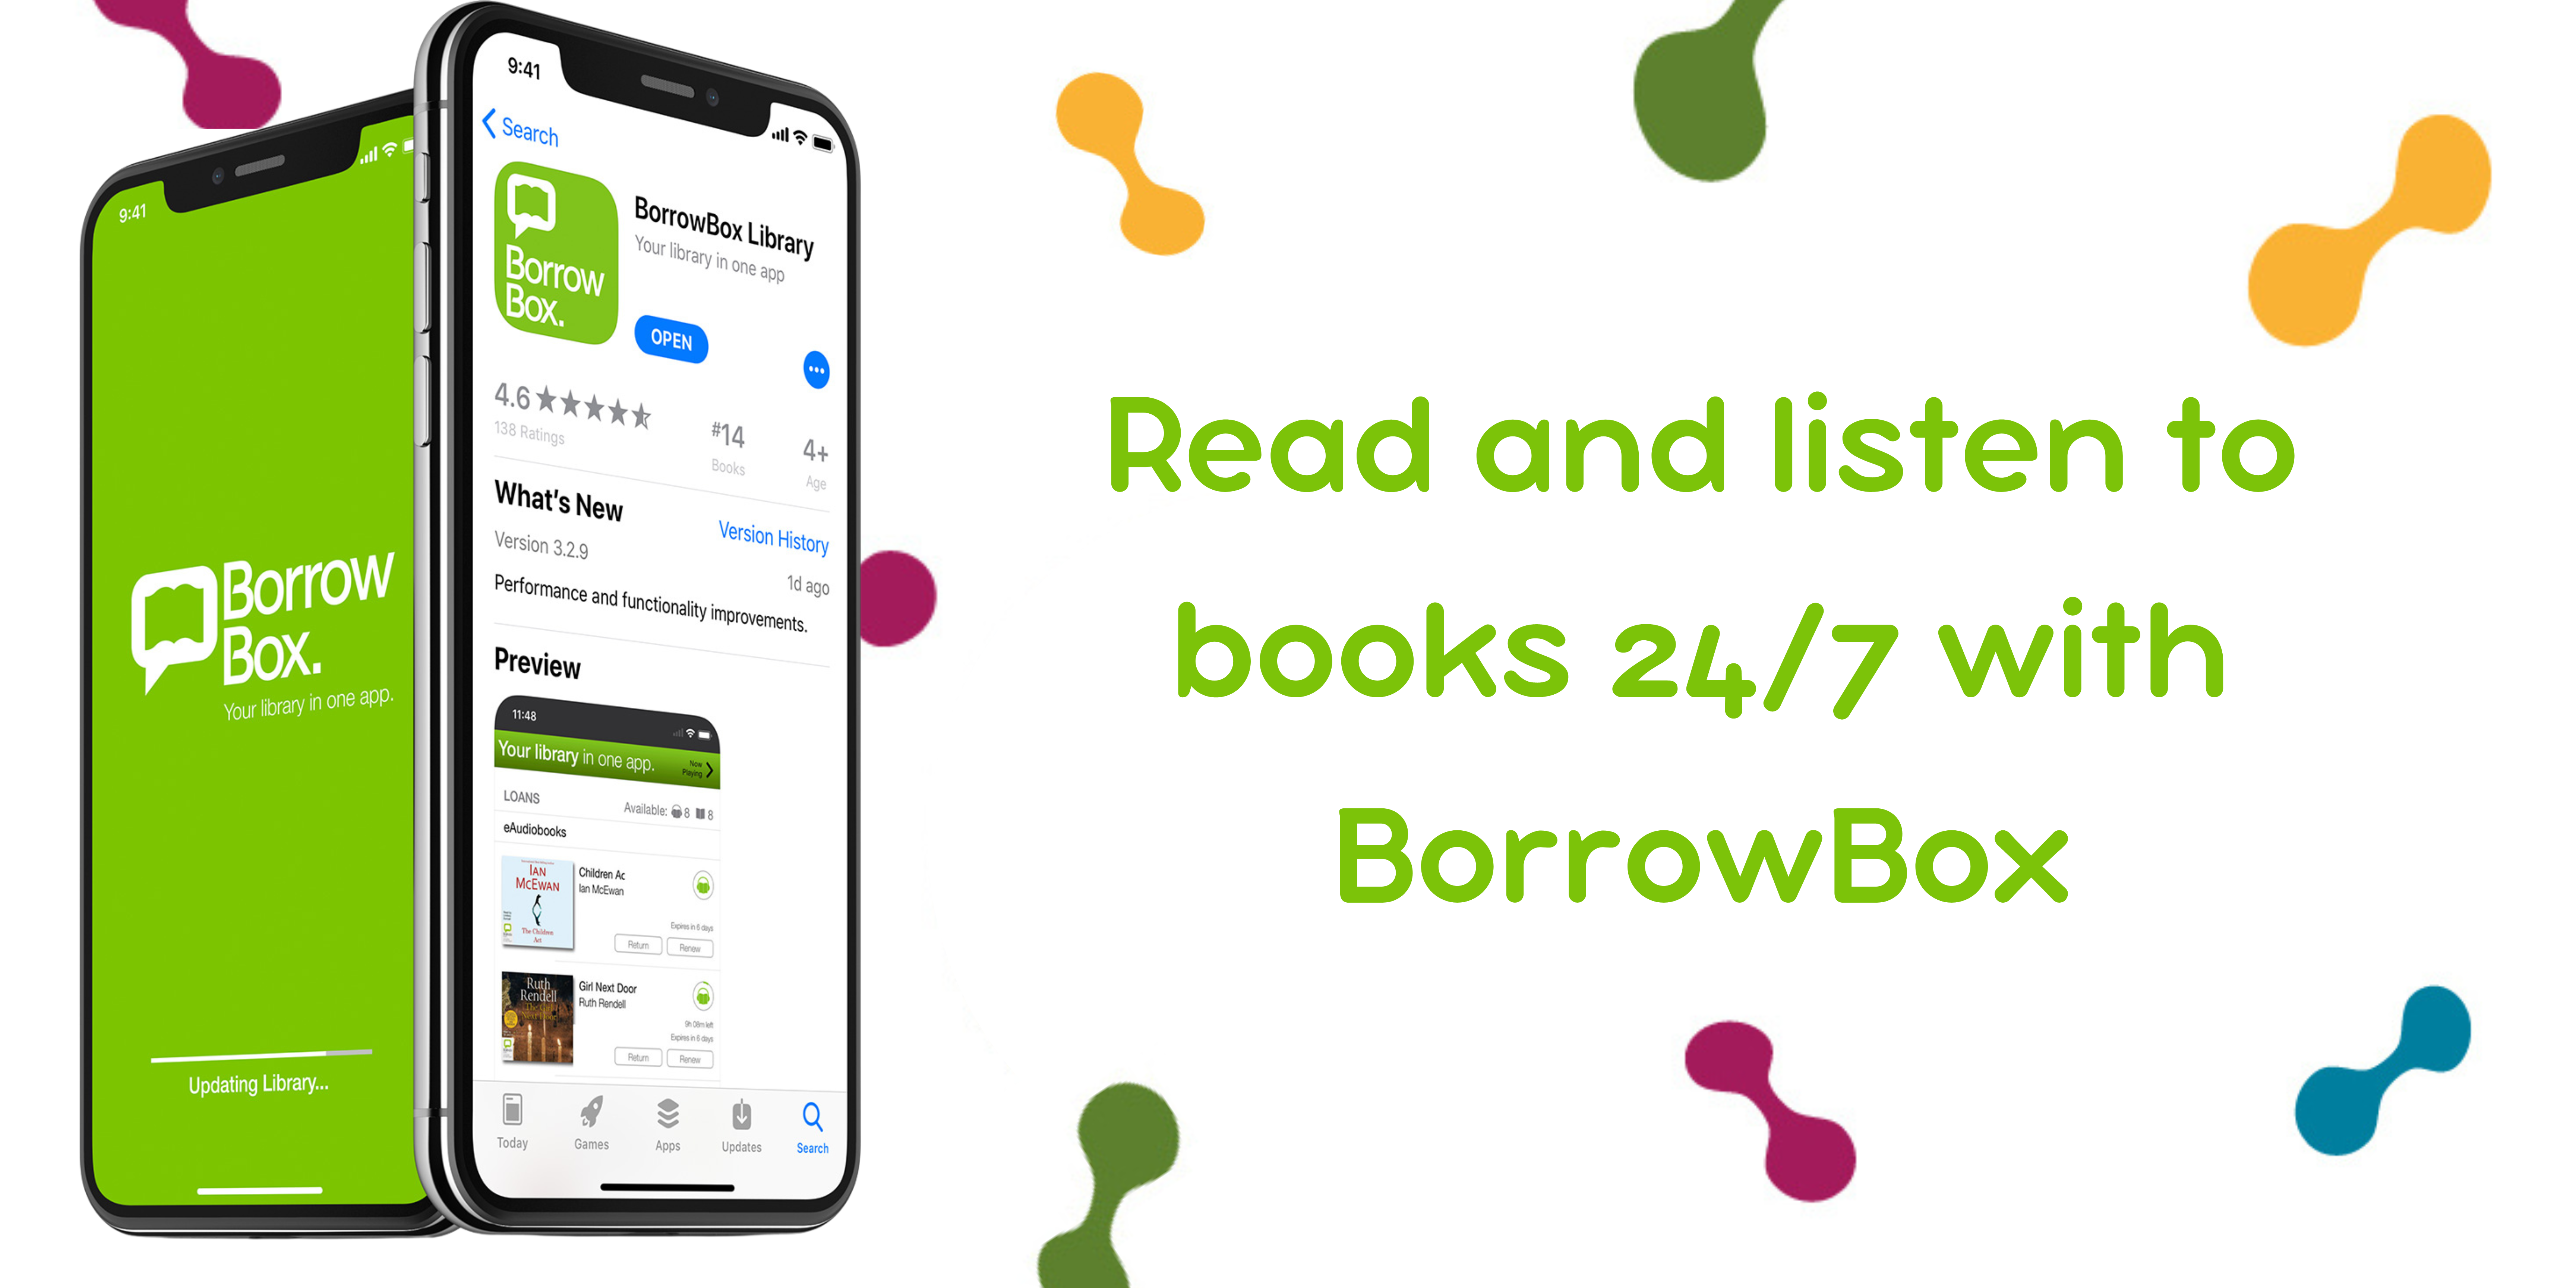 Image with a mobile phone showing screenshots from the BorrowBox app. Green text with words: Read and listen to books 24/7 with BorrowBox